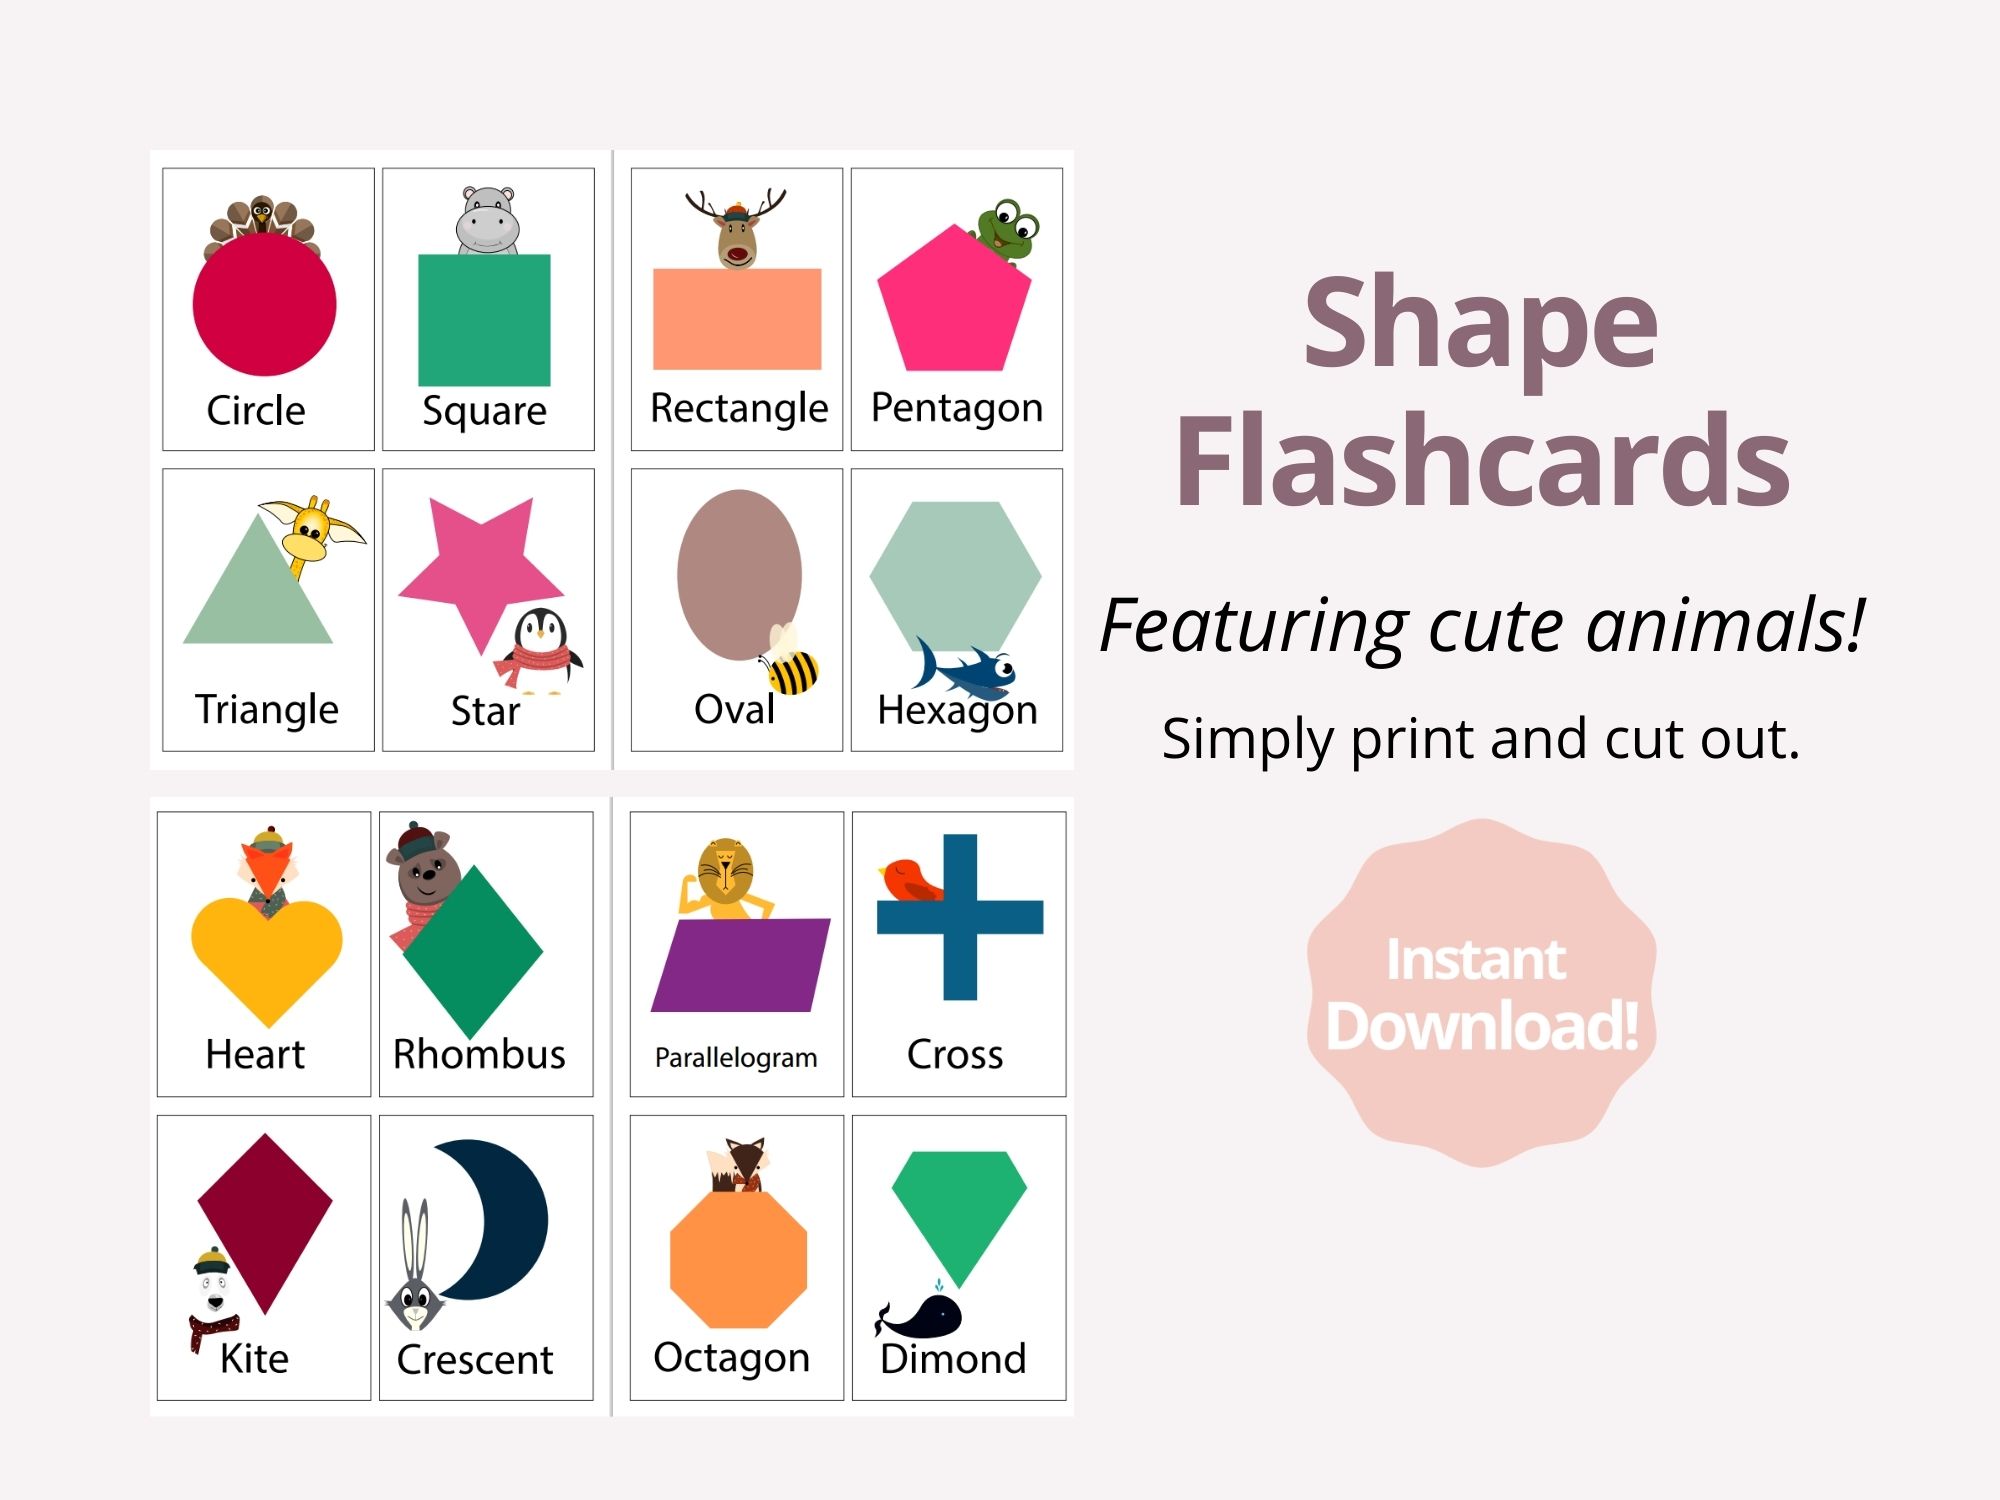 Shape flashcards featuring cute animals